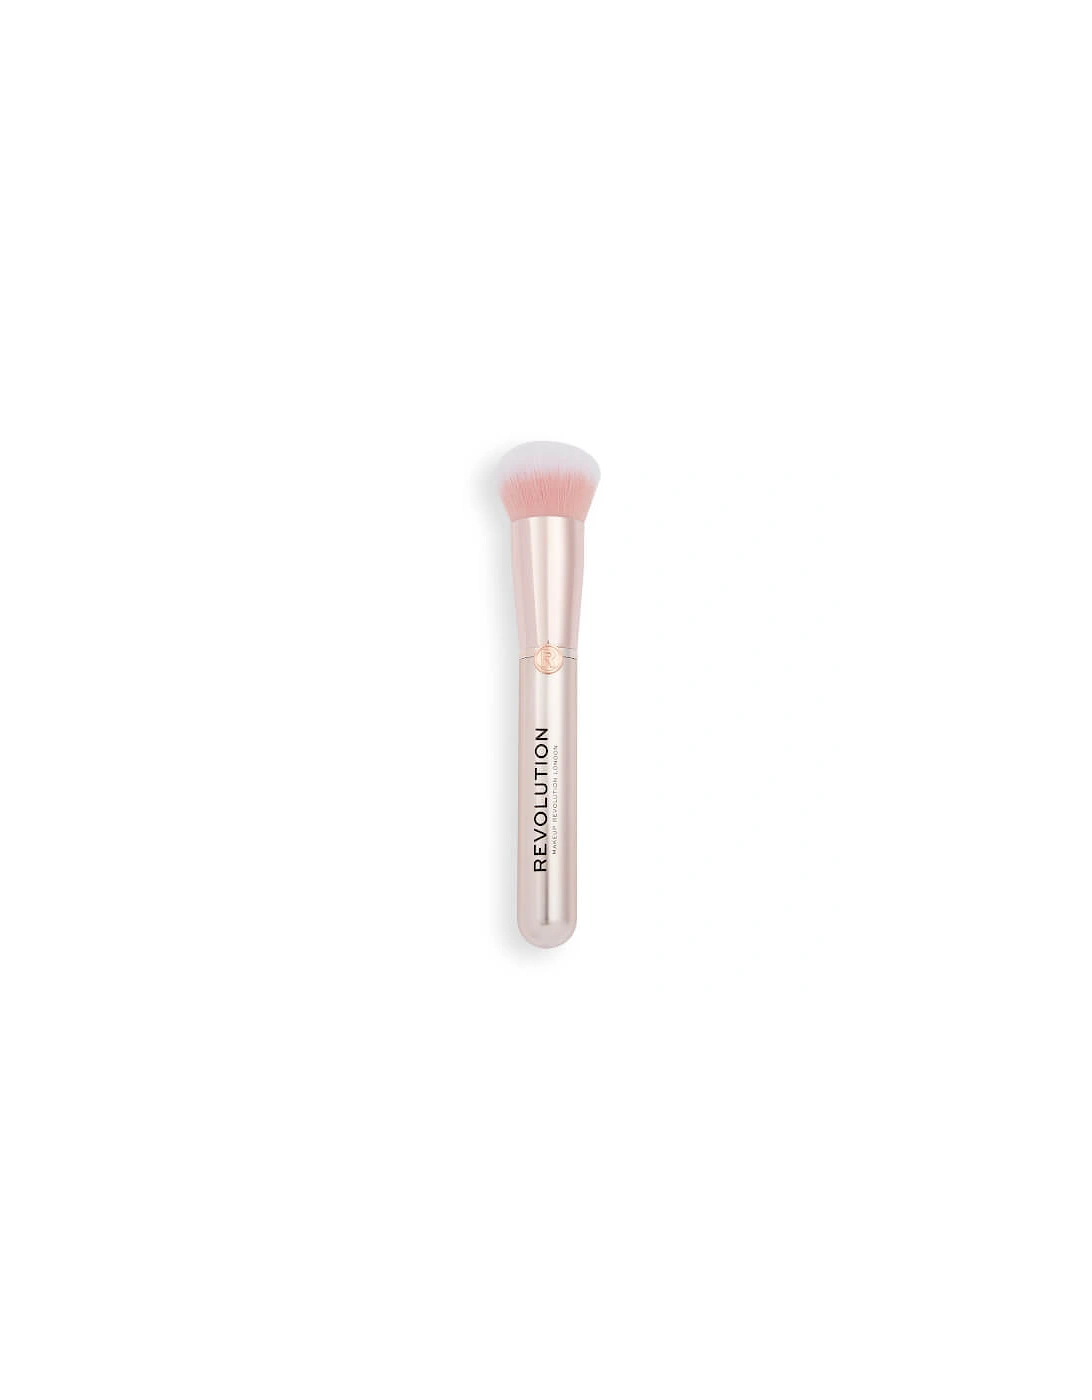 Makeup Create Buffing Foundation Brush R7, 2 of 1